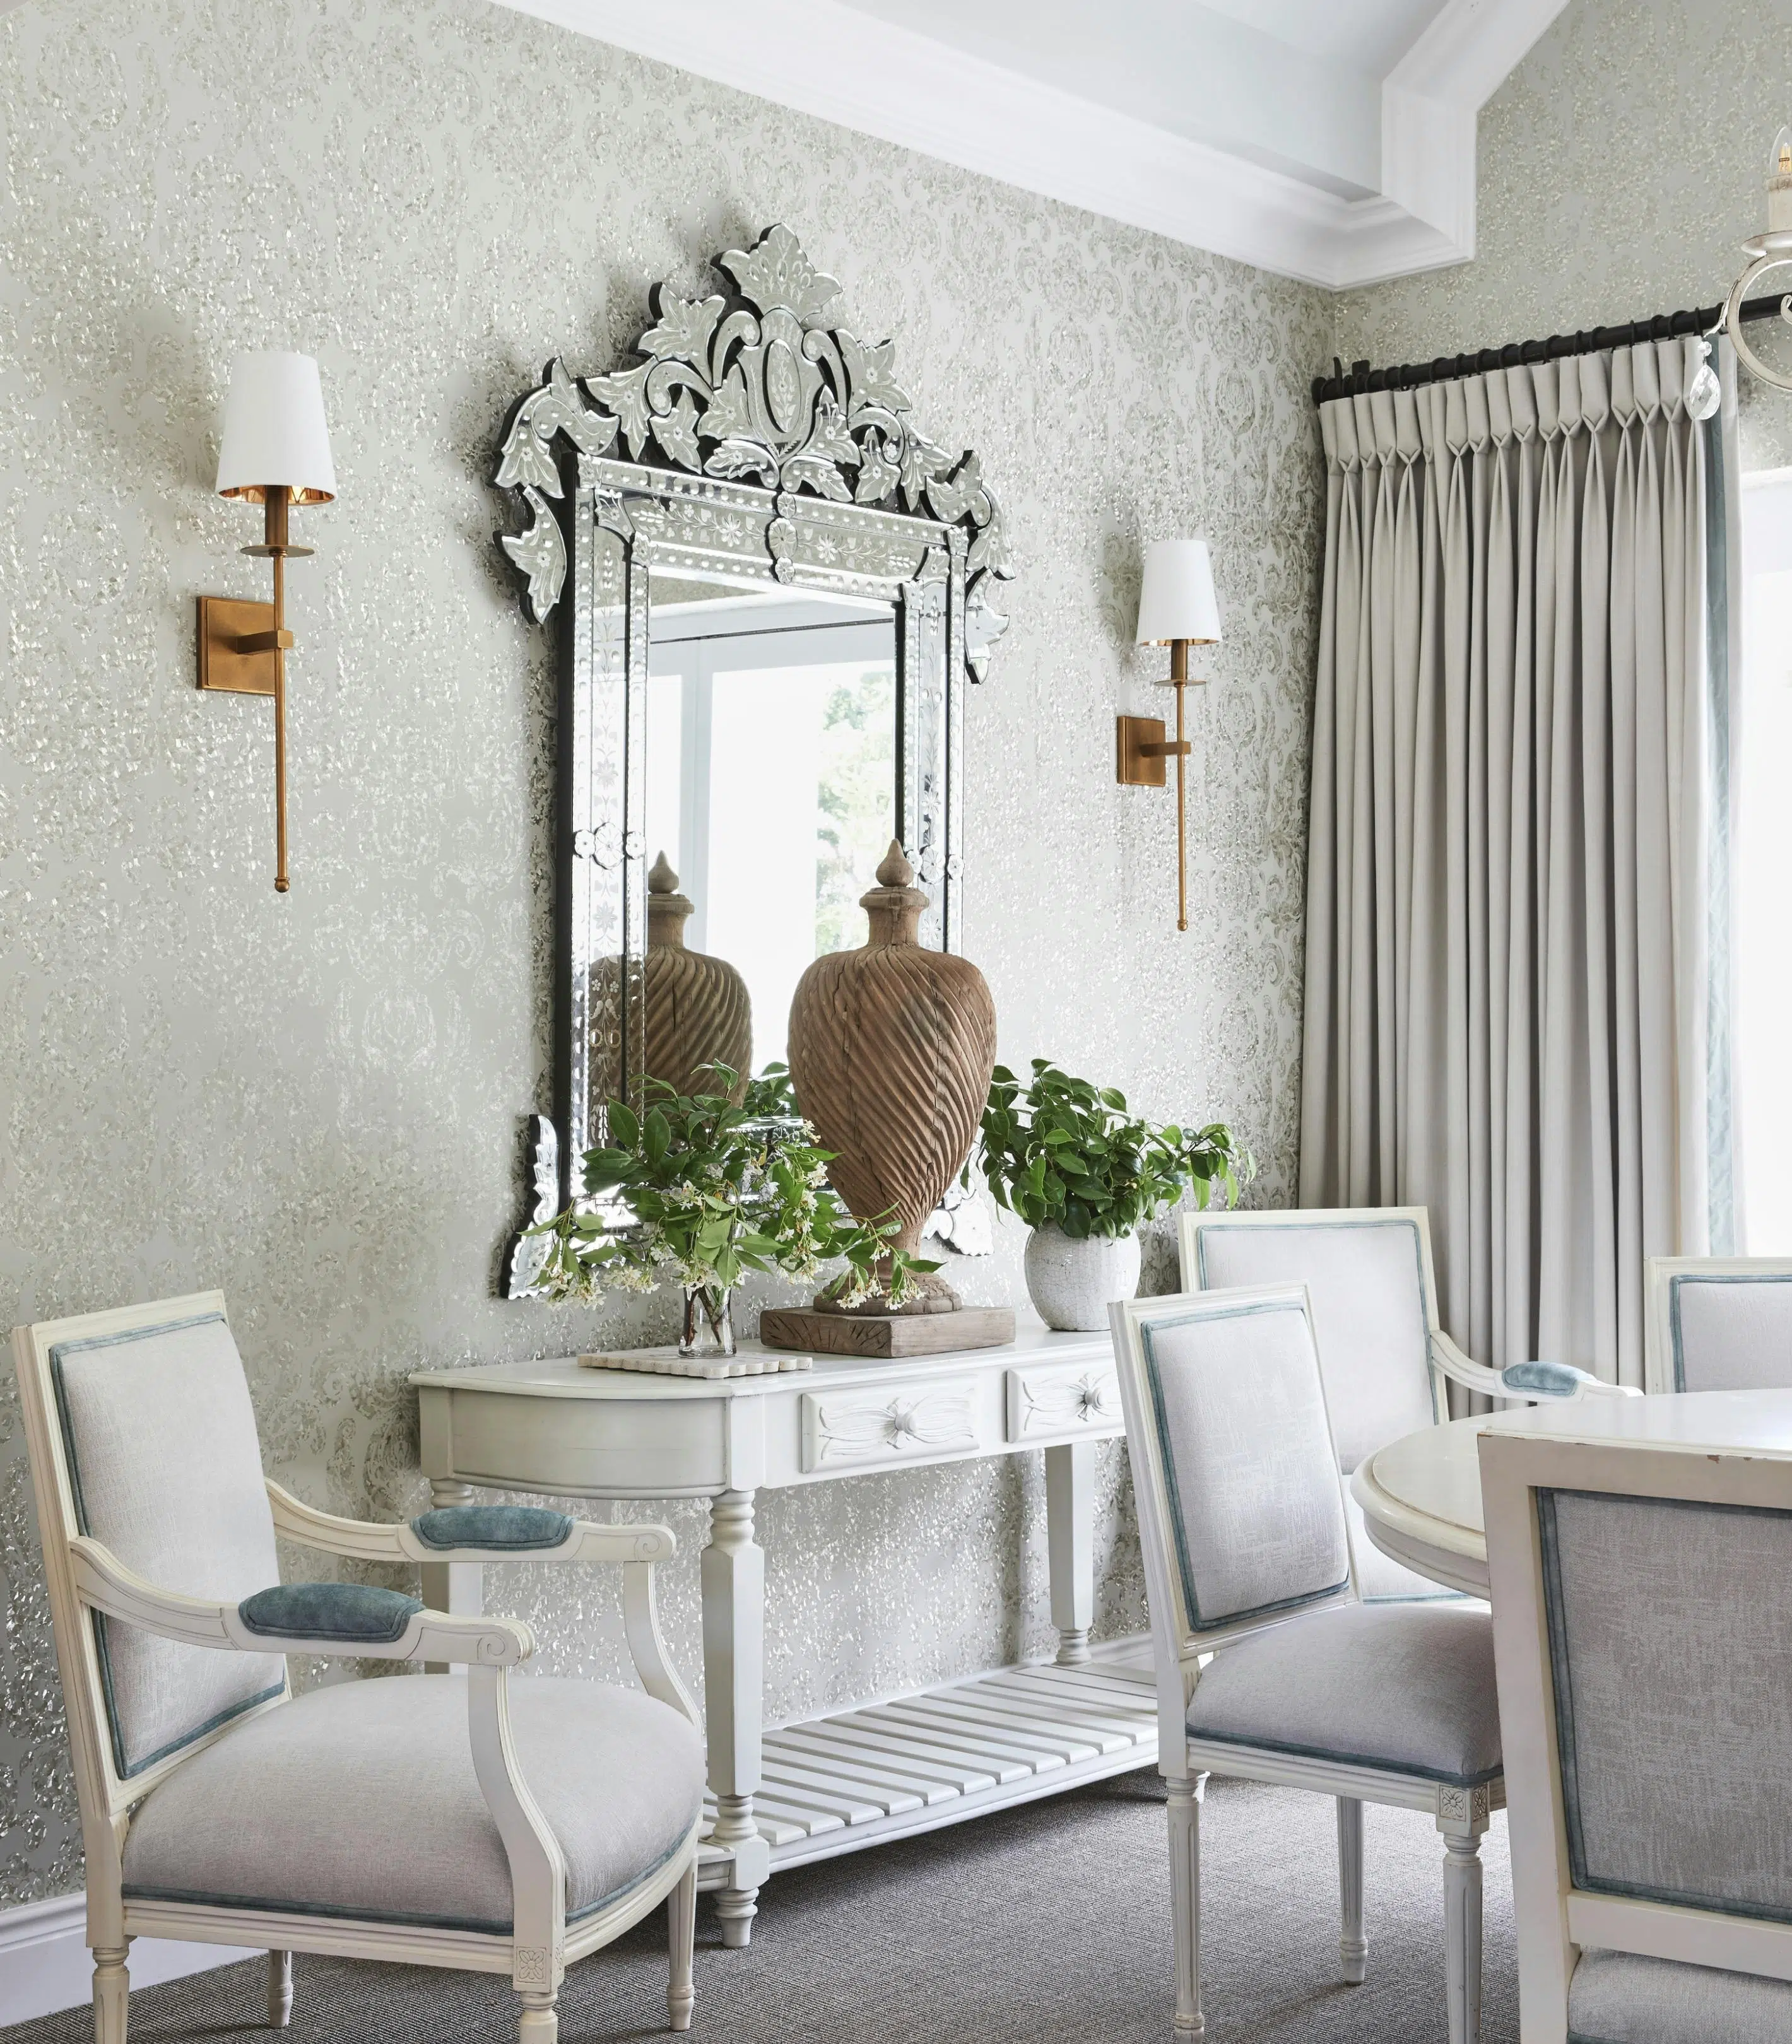 A white console table with decorative accents placed below an ornate mirror on the wall with a sconce positioned on each side.